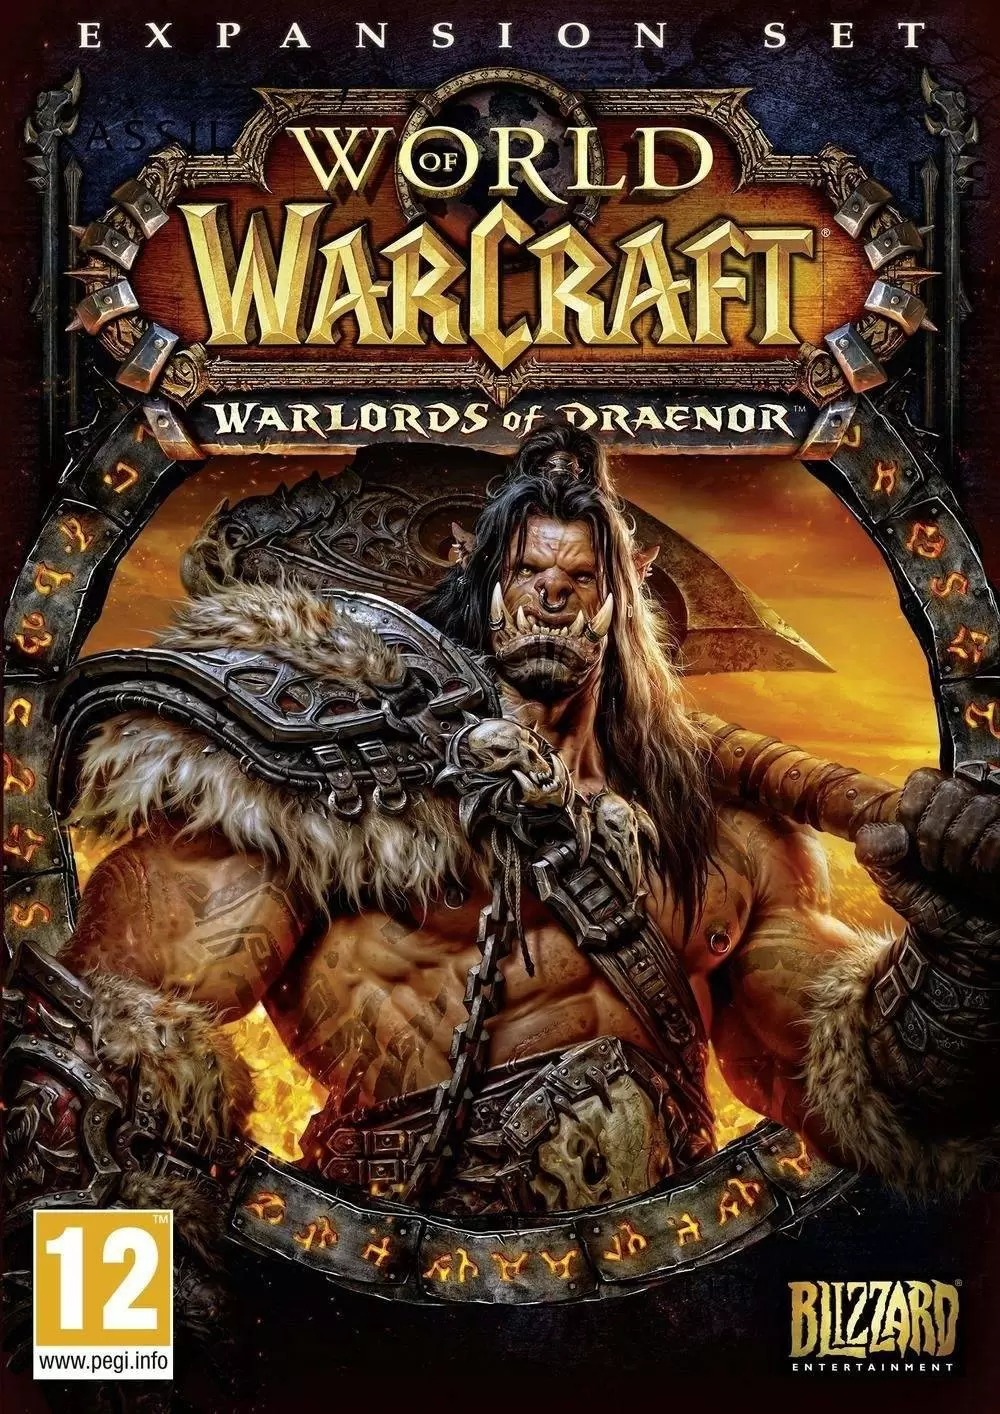 PC Games - World of Warcraft - Warlords of Draenor